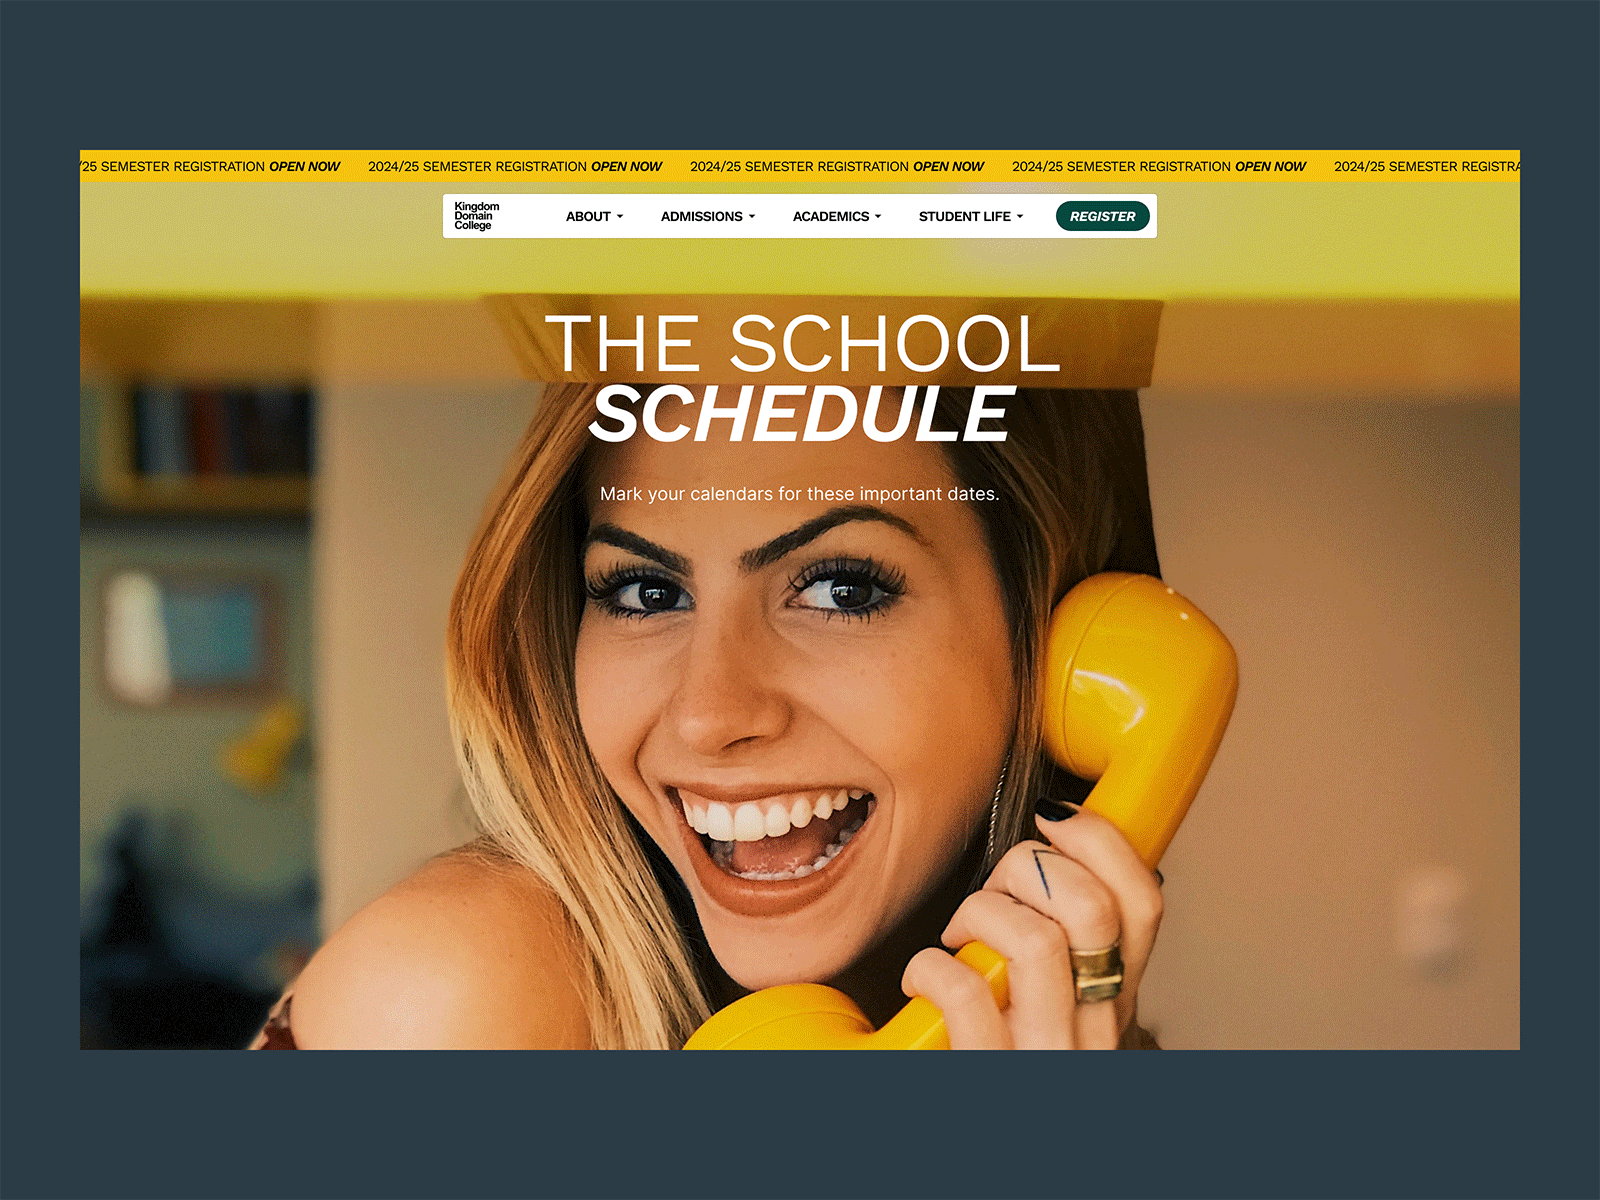 School Event Organizer UI agenda appointment calendar college e learning edtech education education platform learning lesson online school schedule scheduler student tasks list timeline timetable to do university web page